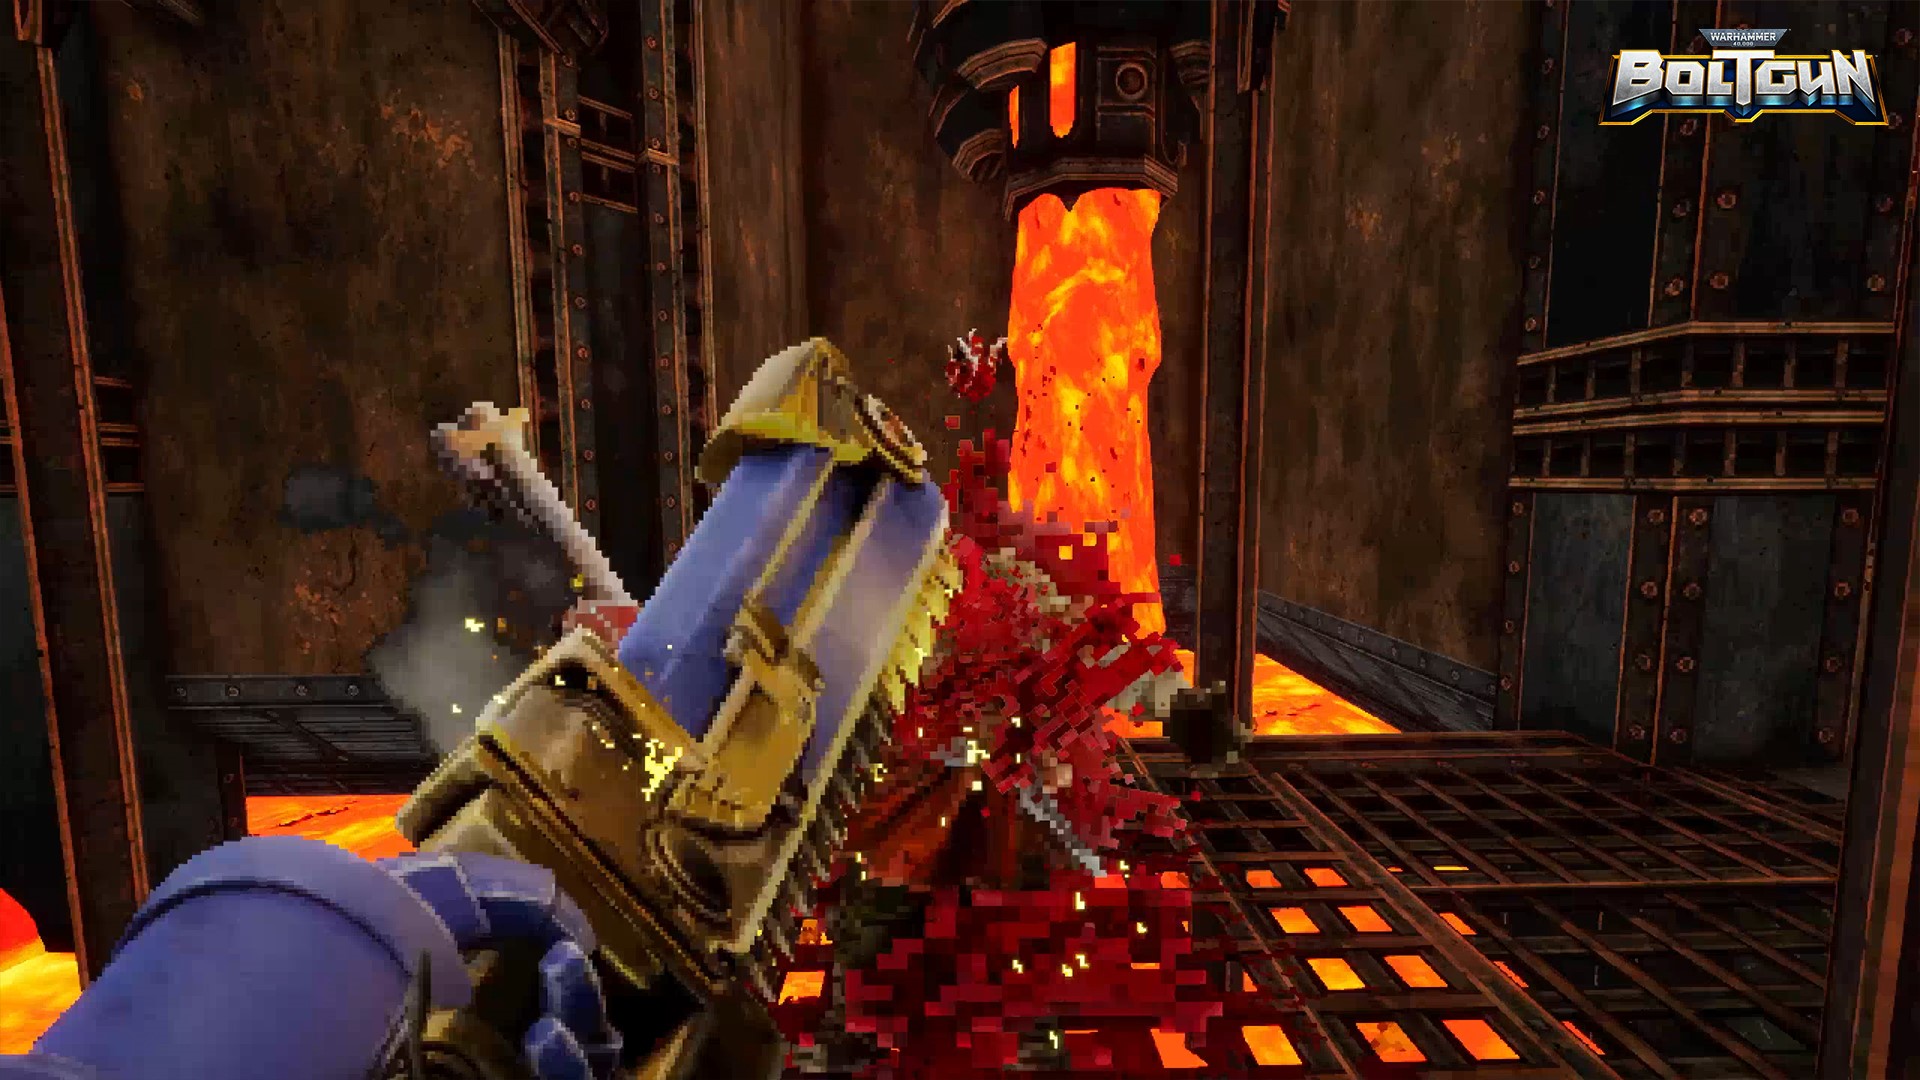 player using chainsword on enemy